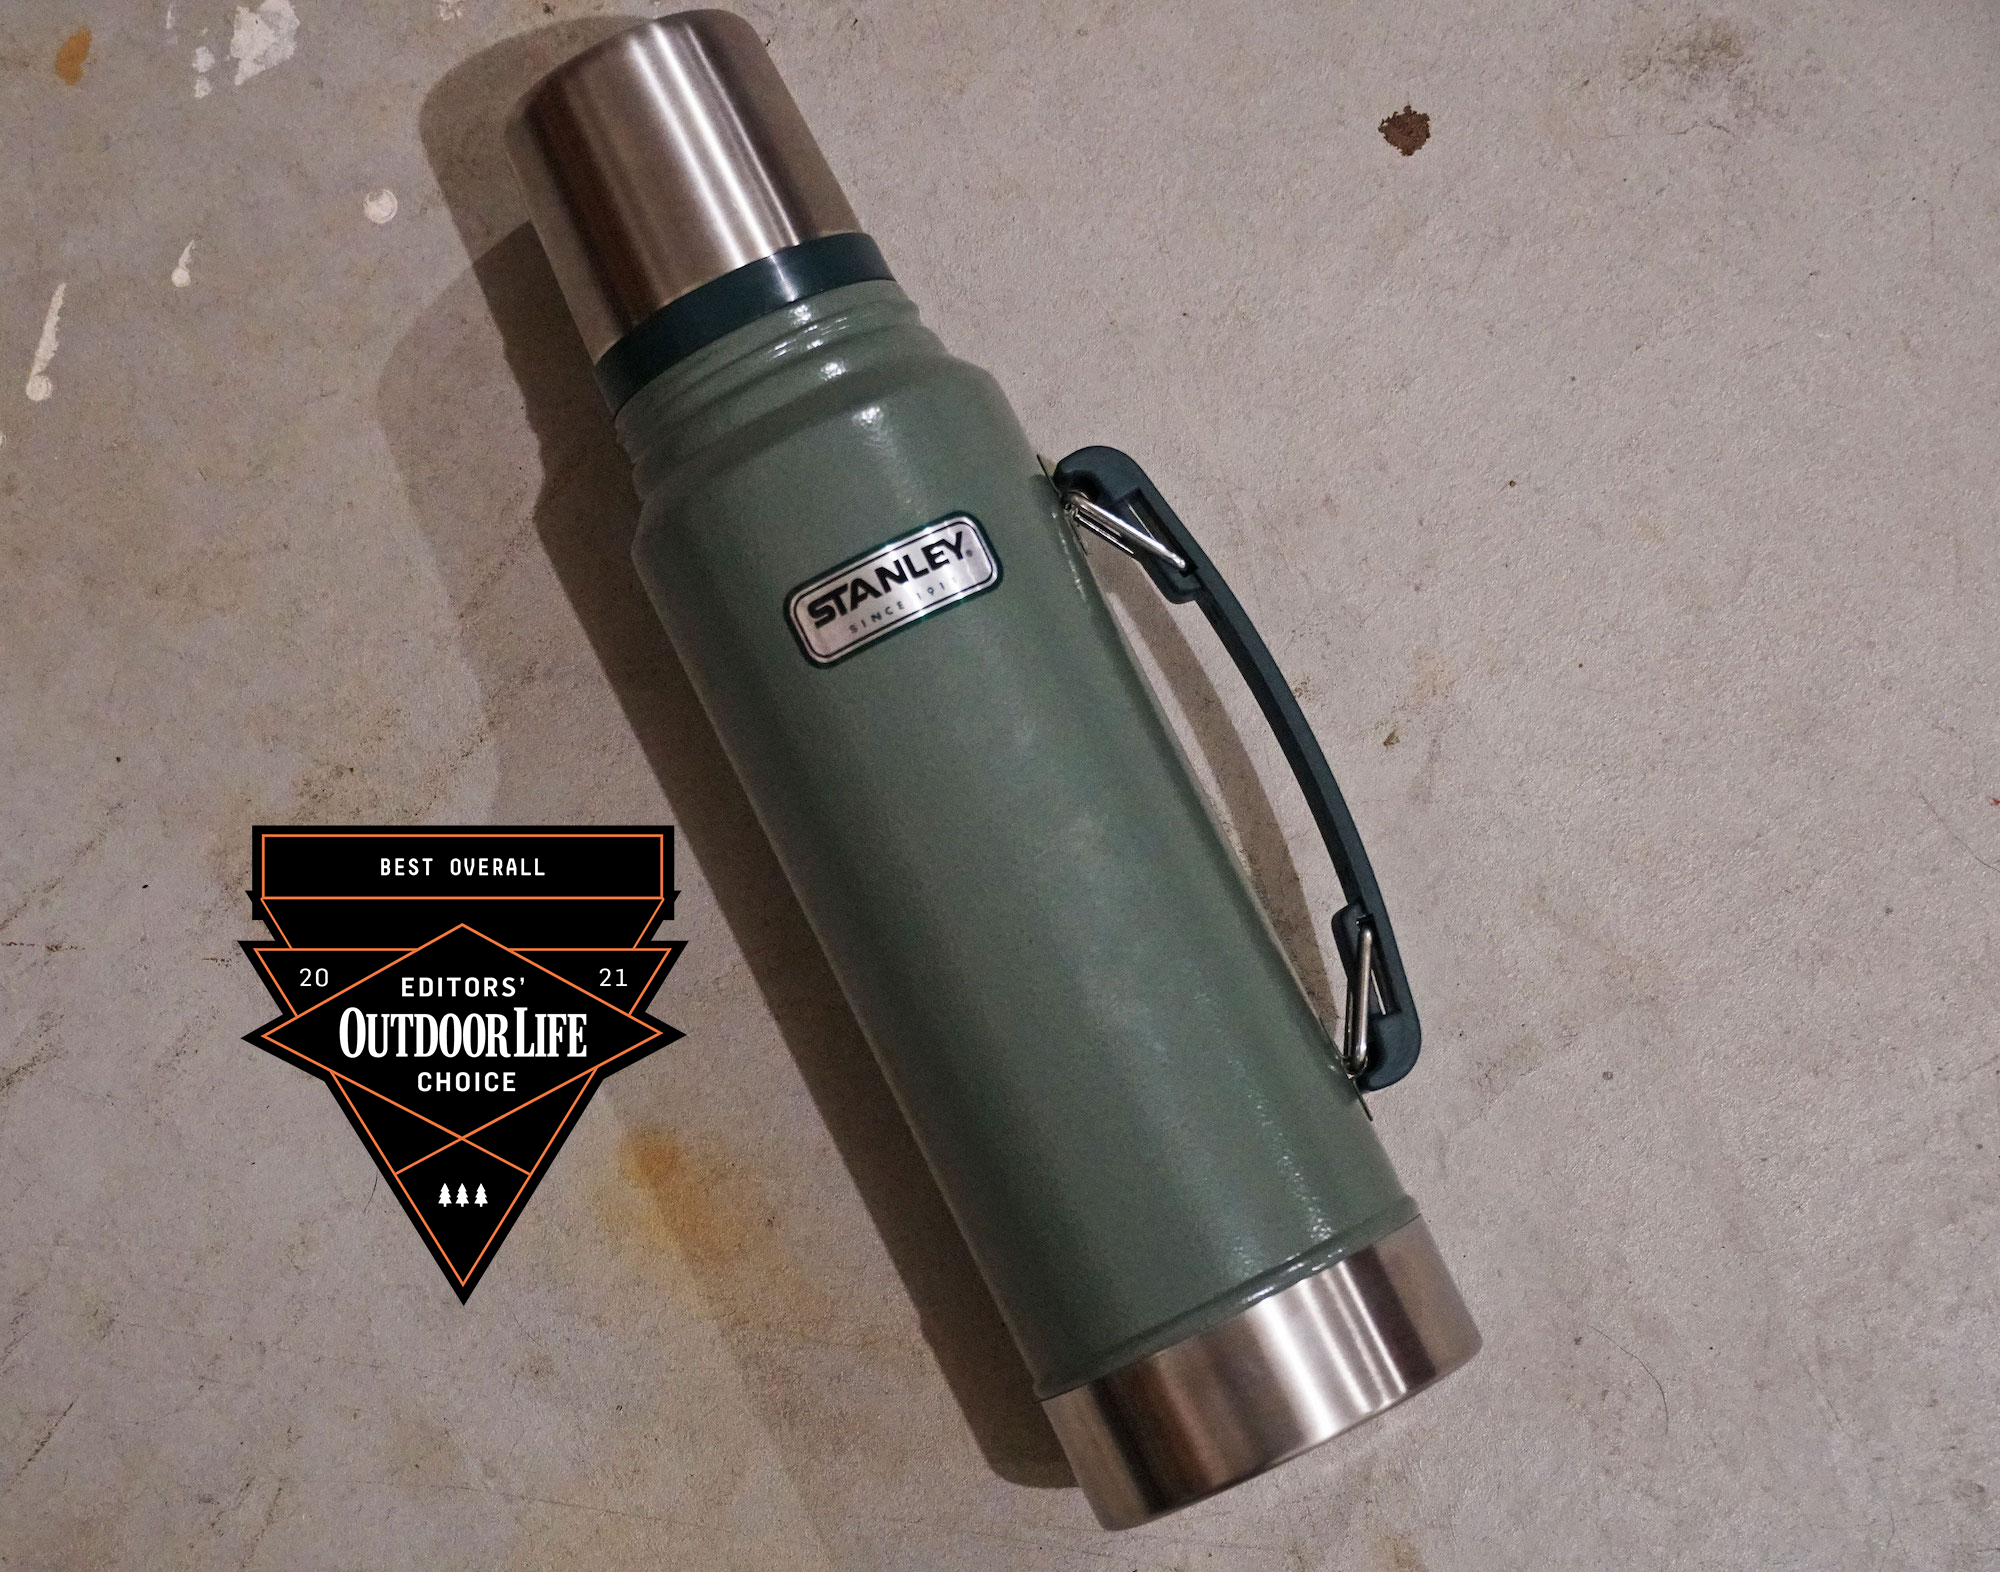 A green Stanley thermos with a handle and a silver top